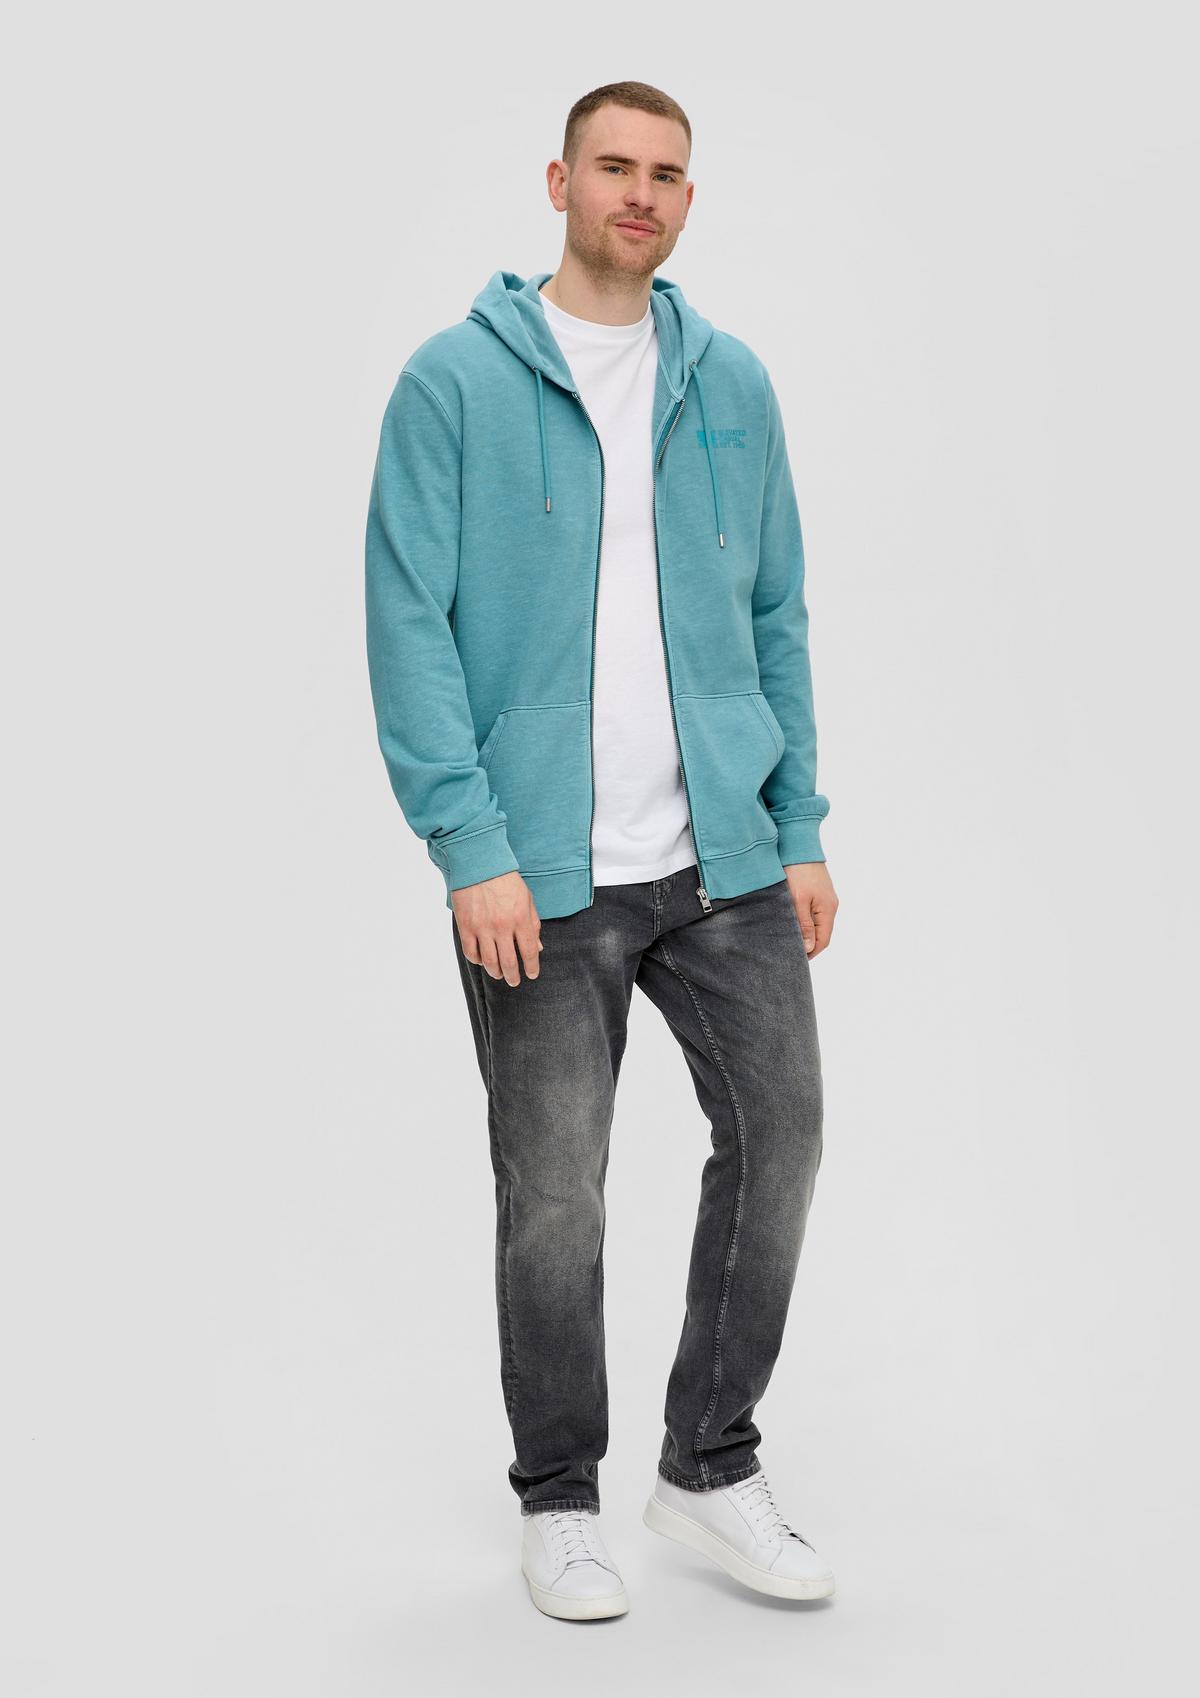 s.Oliver Garment-dyed sweatshirt jacket with a hood